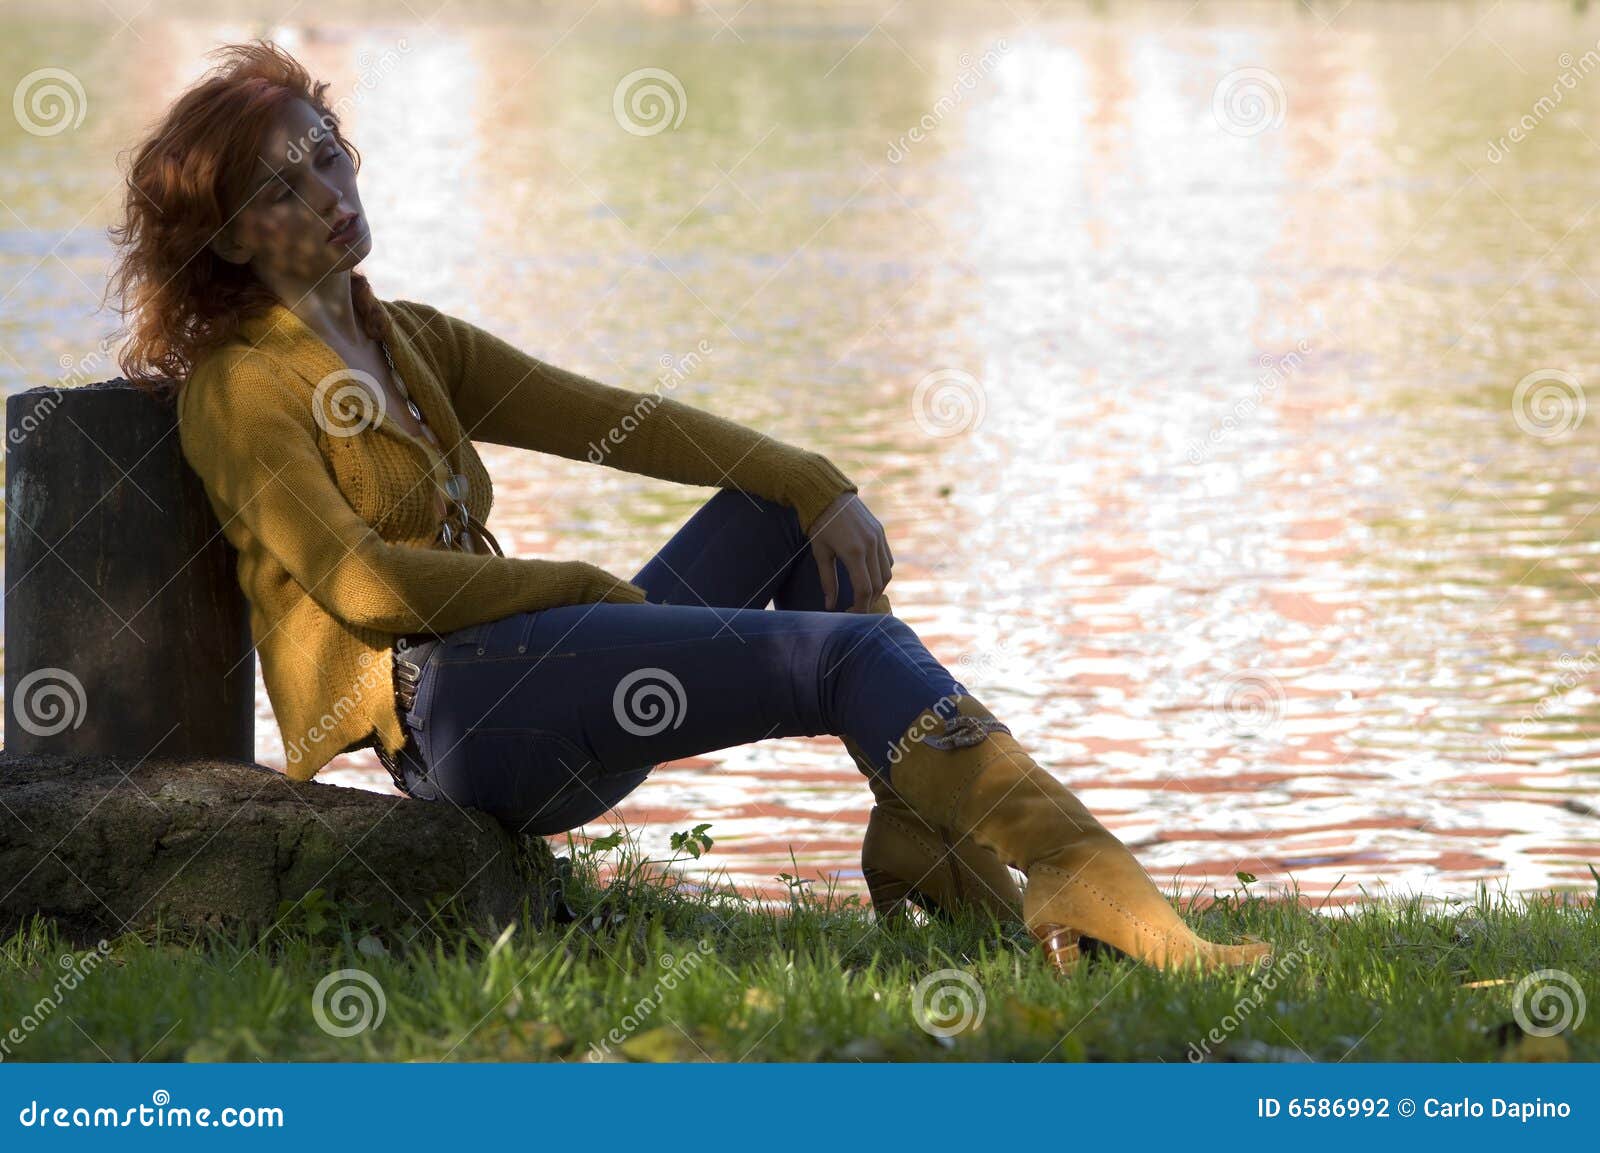 Sun in october stock photo. Image of brown, hair, lifestyles - 6586992